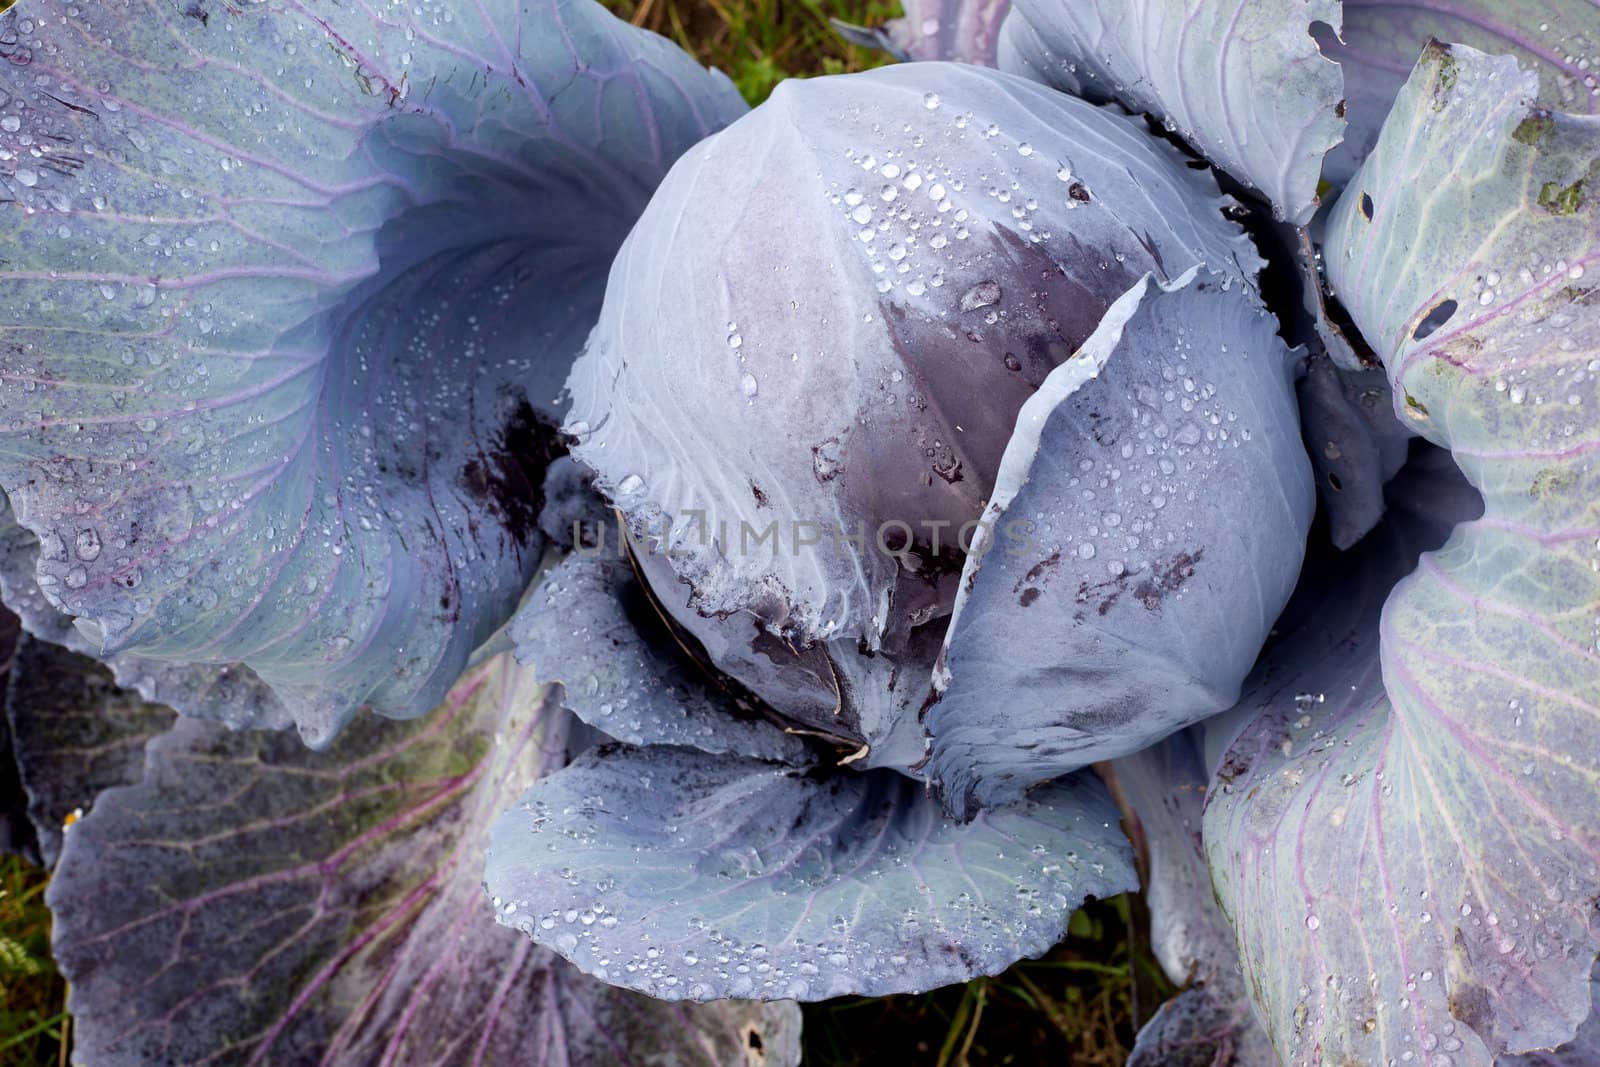 red cabbage growing in the garden with droplets